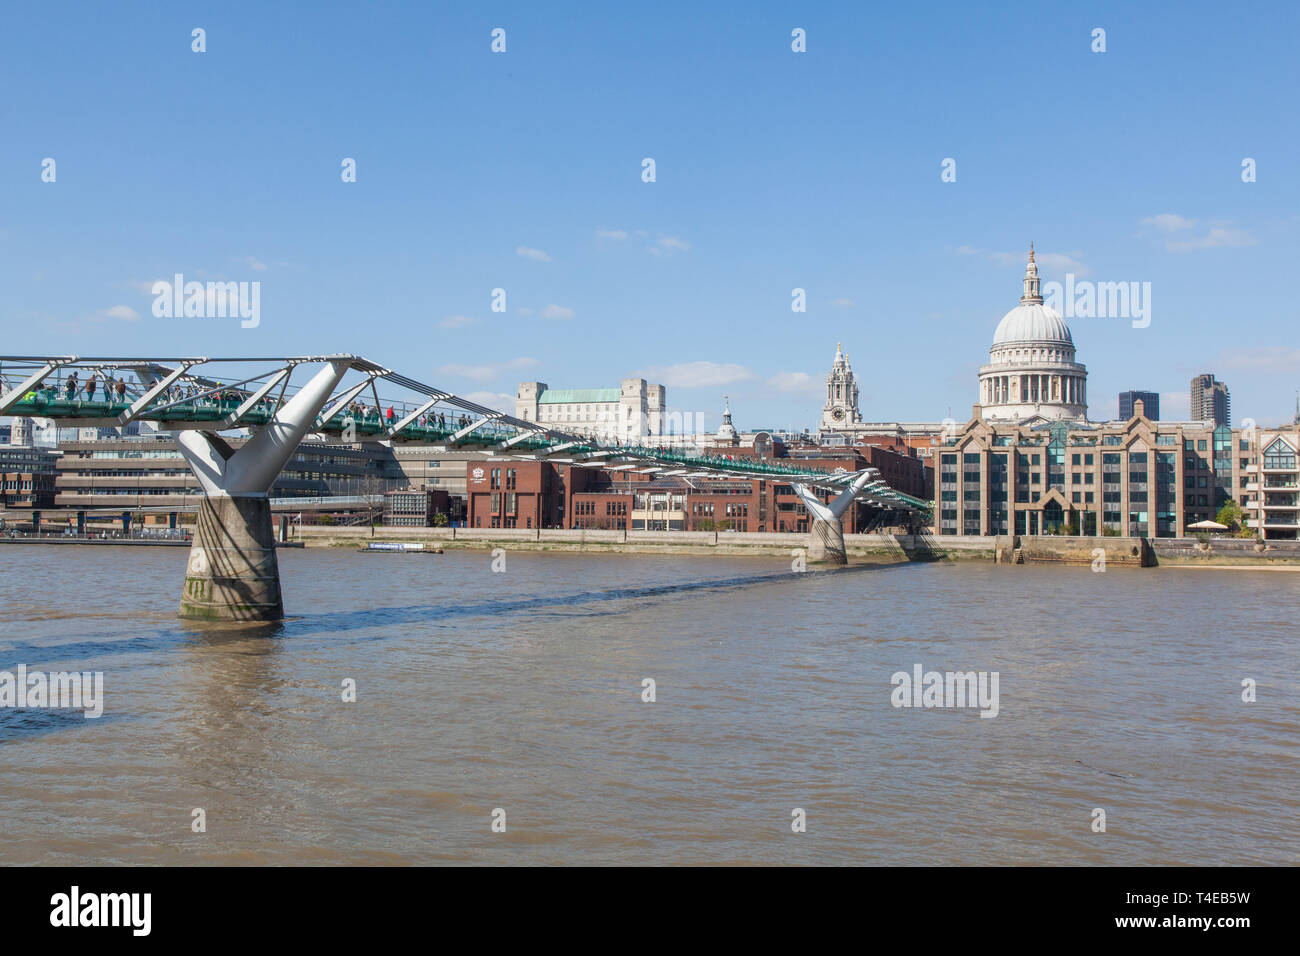 Millennium bridge over the river Thames towards St Paul's Cathedral, London, England, United Kingdom. Stock Photo